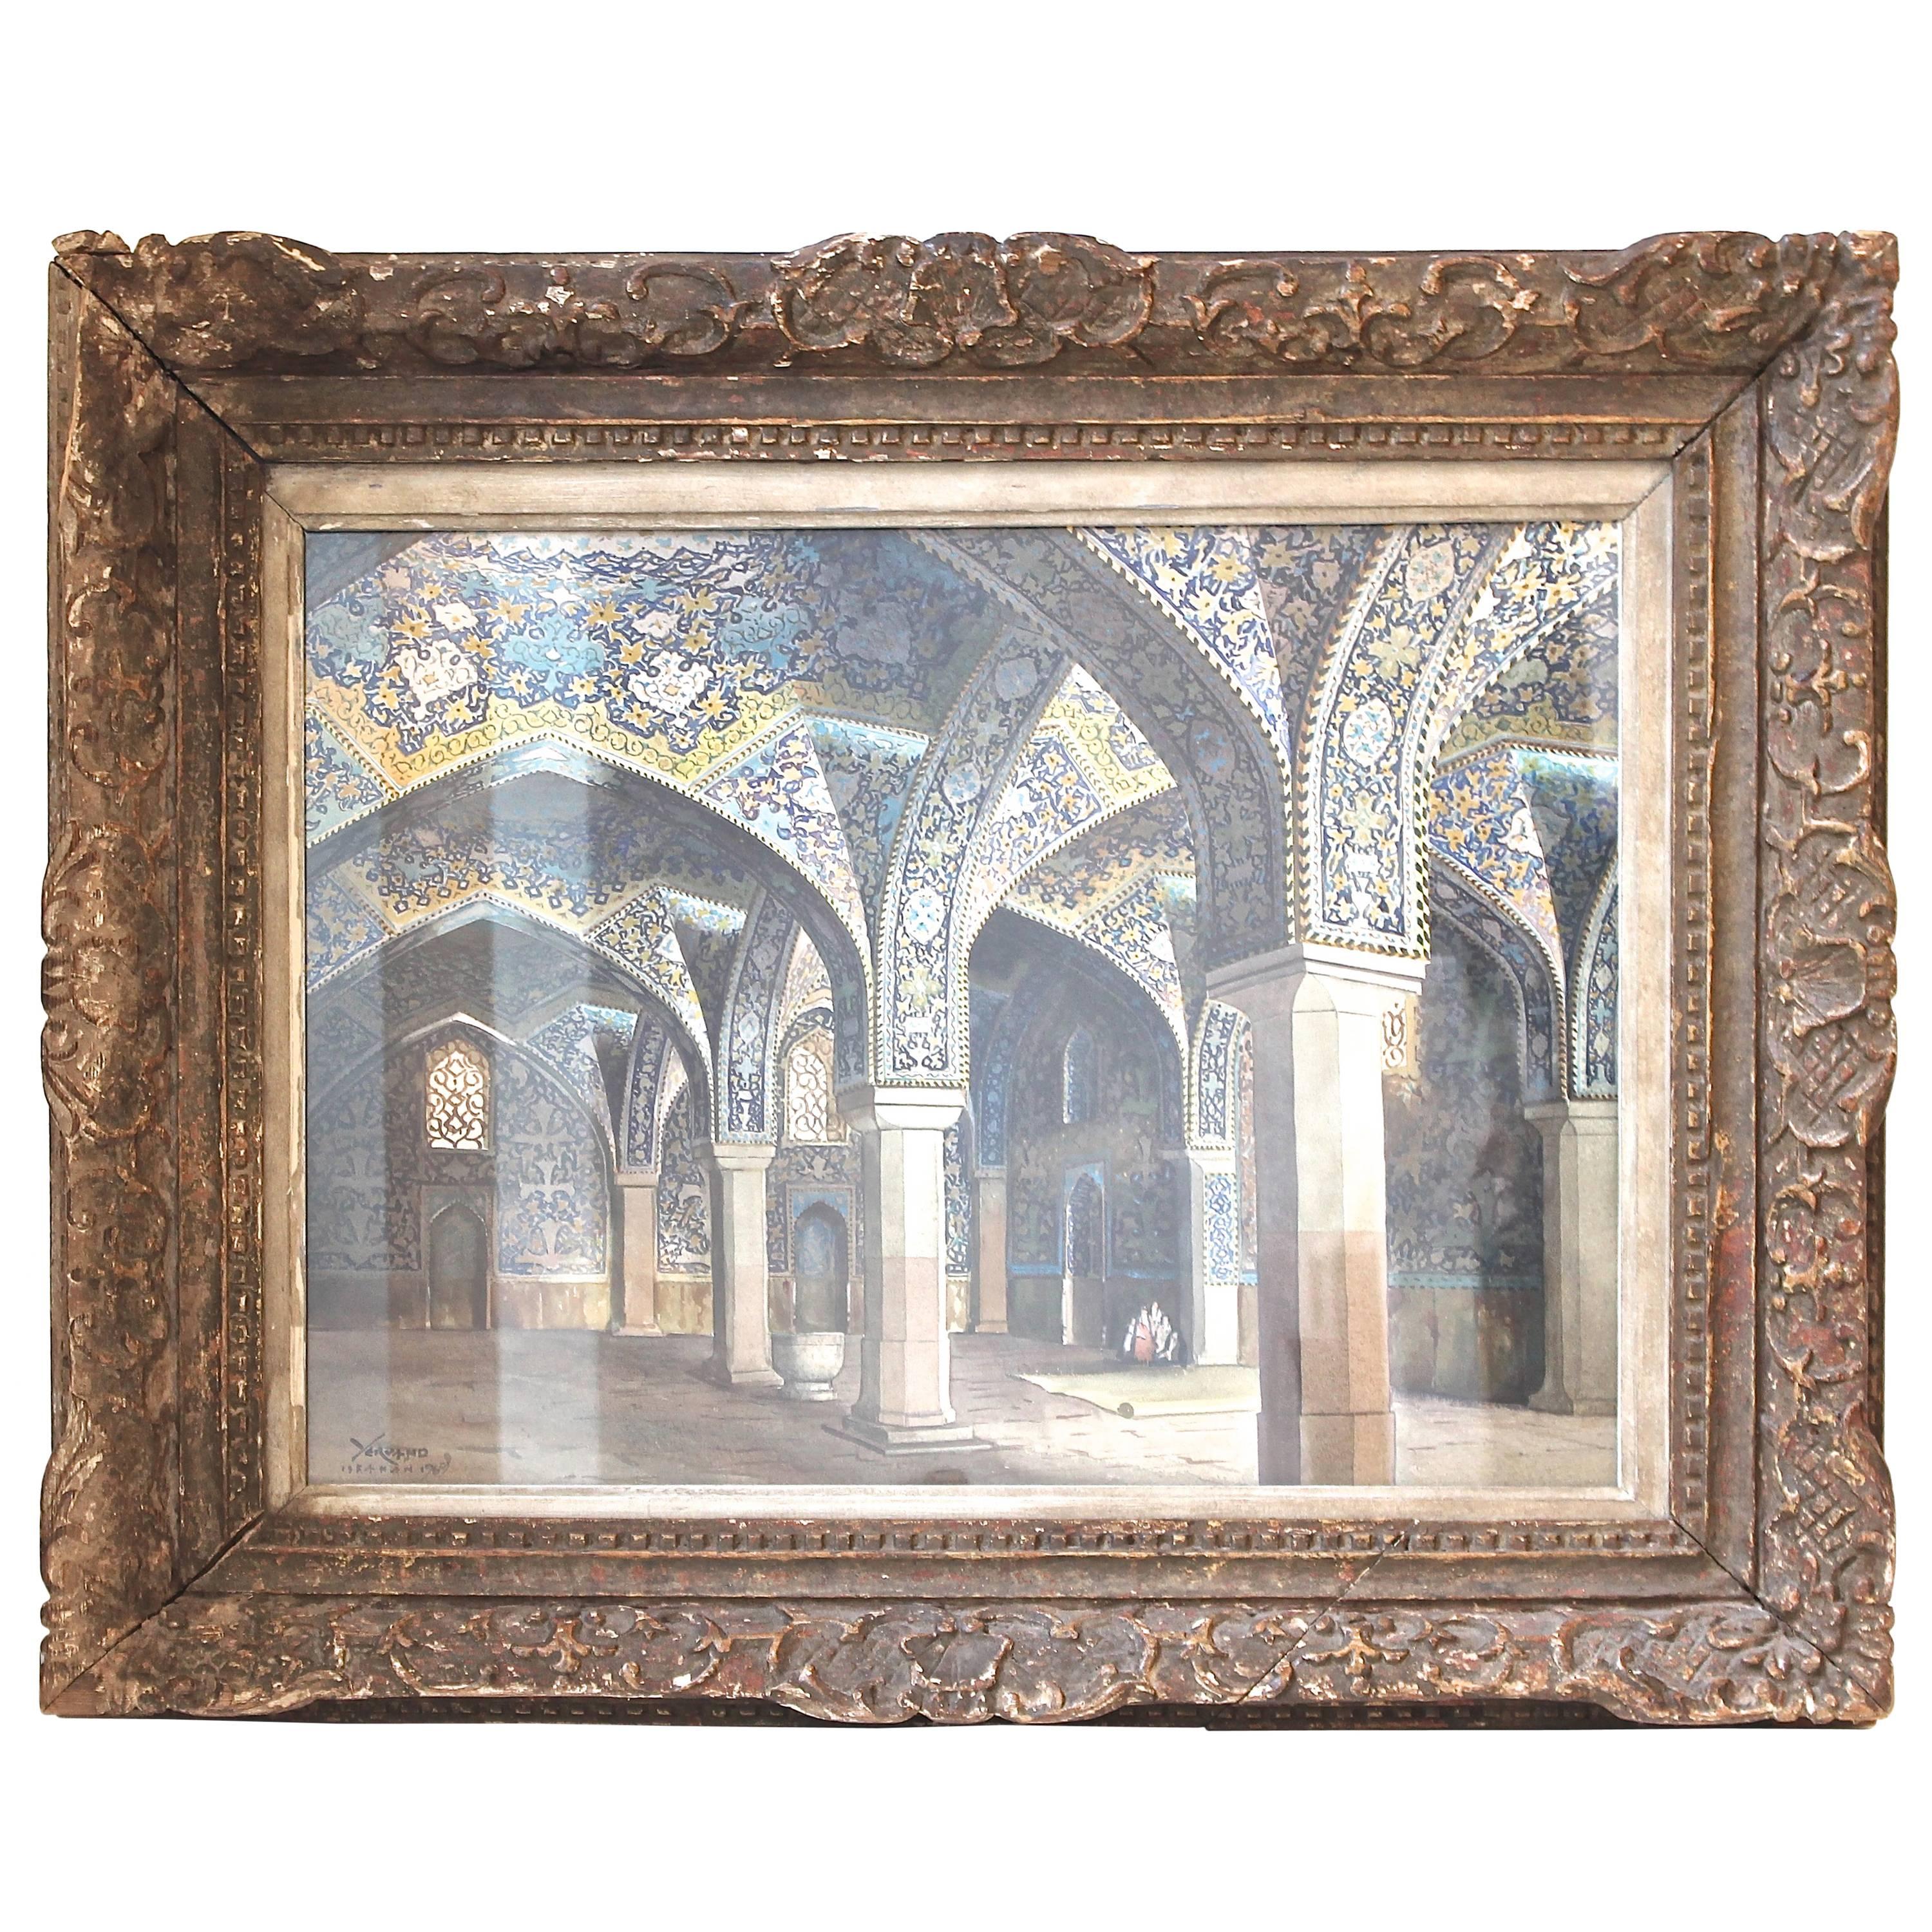 Mosque Interior Watercolor by Nahapetian Yervand "Isfahan, 1969"